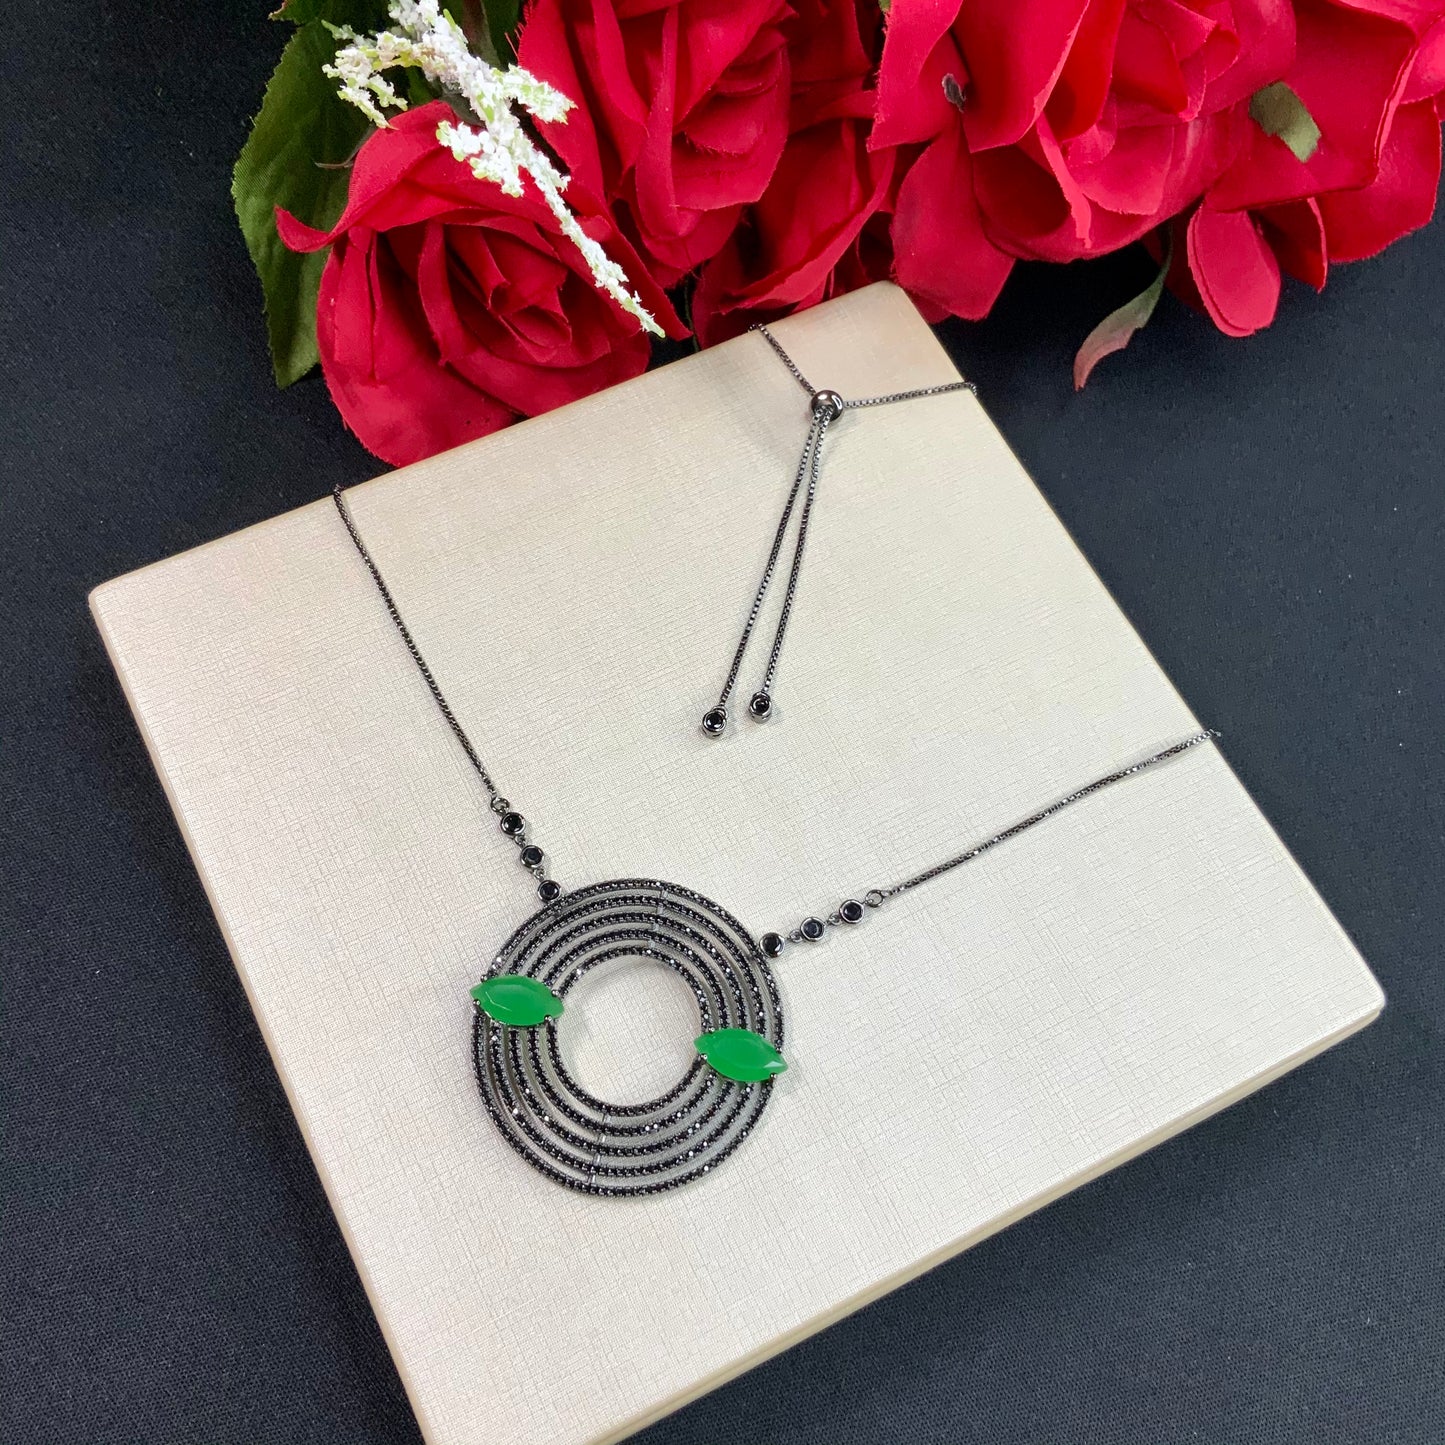 Adjustable Emerald Necklace in Black Rhodium Plated